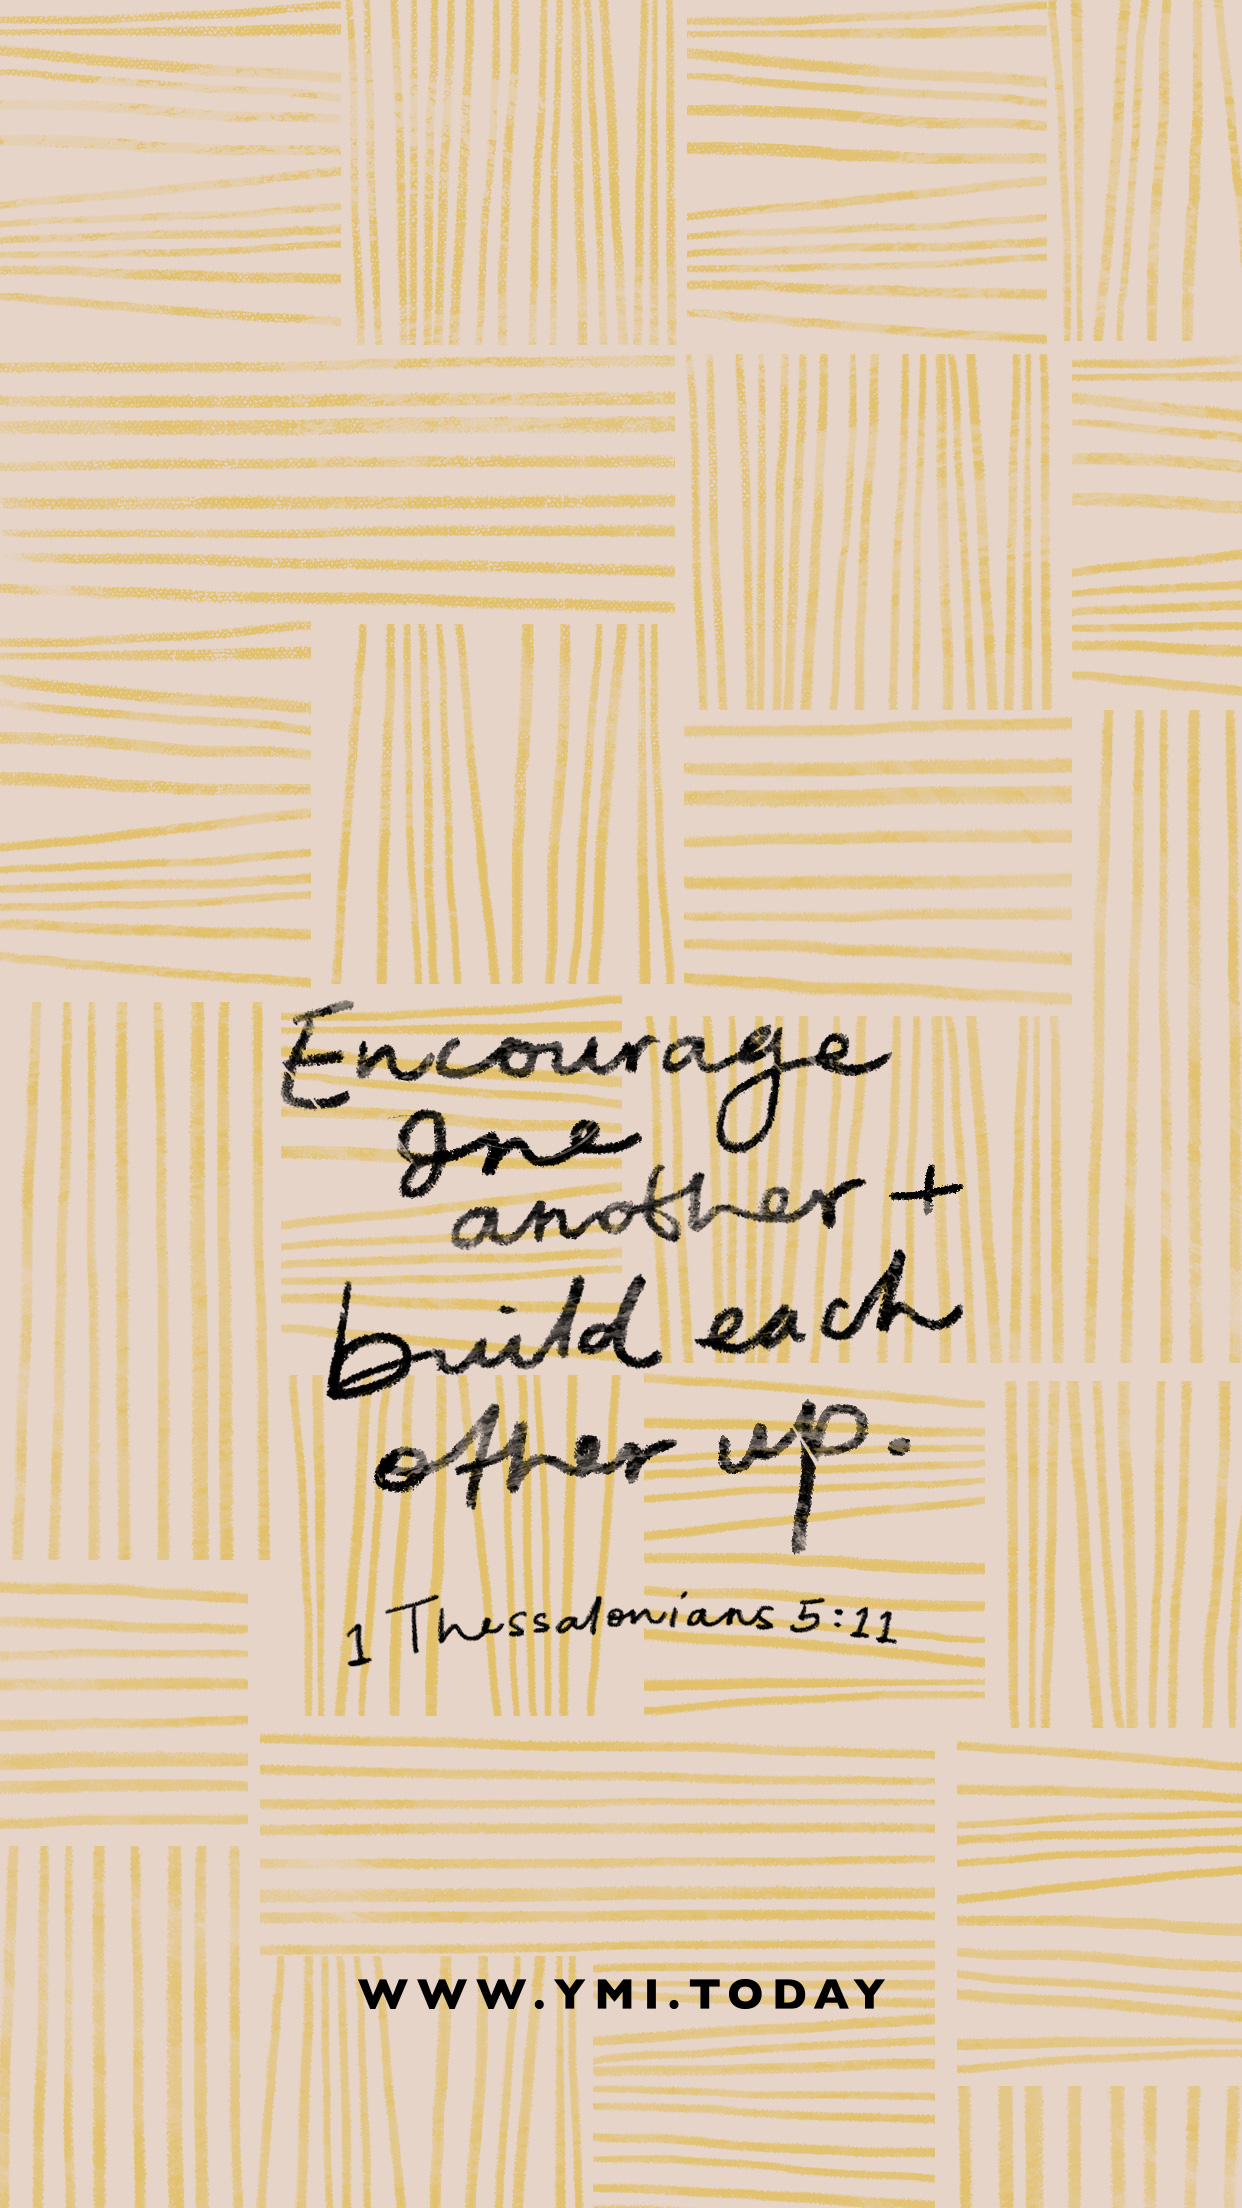 YMI June 2020 Phone Lockscreen - Encourage one another and build each other up. - 1 Thessalonians 5:11